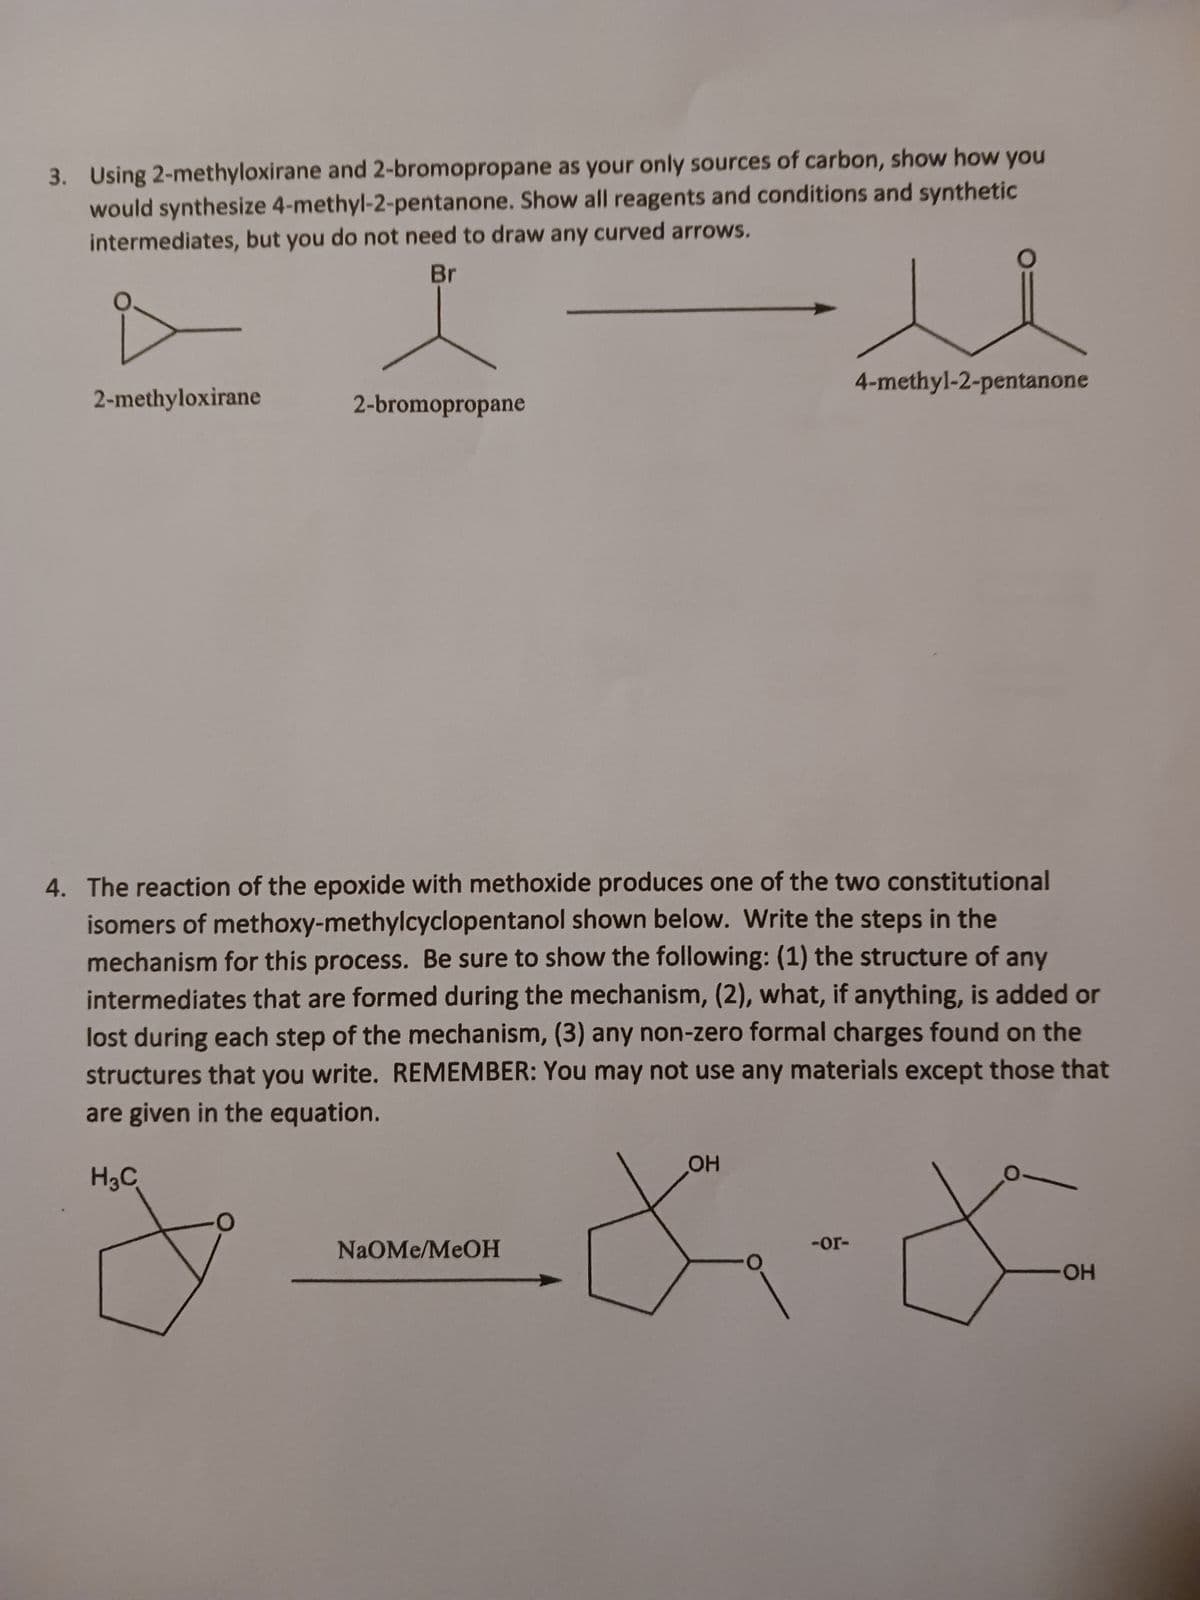 3. Using 2-methyloxirane and 2-bromopropane as your only sources of carbon, show how you
would synthesize 4-methyl-2-pentanone. Show all reagents and conditions and synthetic
intermediates, but you do not need to draw any curved arrows.
Br
2-methyloxirane
2-bromopropane
4. The reaction of the epoxide with methoxide produces one of the two constitutional
isomers of methoxy-methylcyclopentanol shown below. Write the steps in the
mechanism for this process. Be sure to show the following: (1) the structure of any
intermediates that are formed during the mechanism, (2), what, if anything, is added or
lost during each step of the mechanism, (3) any non-zero formal charges found on the
structures that you write. REMEMBER: You may not use any materials except those that
are given in the equation.
H3C
NaOMe/MeOH
4-methyl-2-pentanone
OH
-or-
*-*
OH